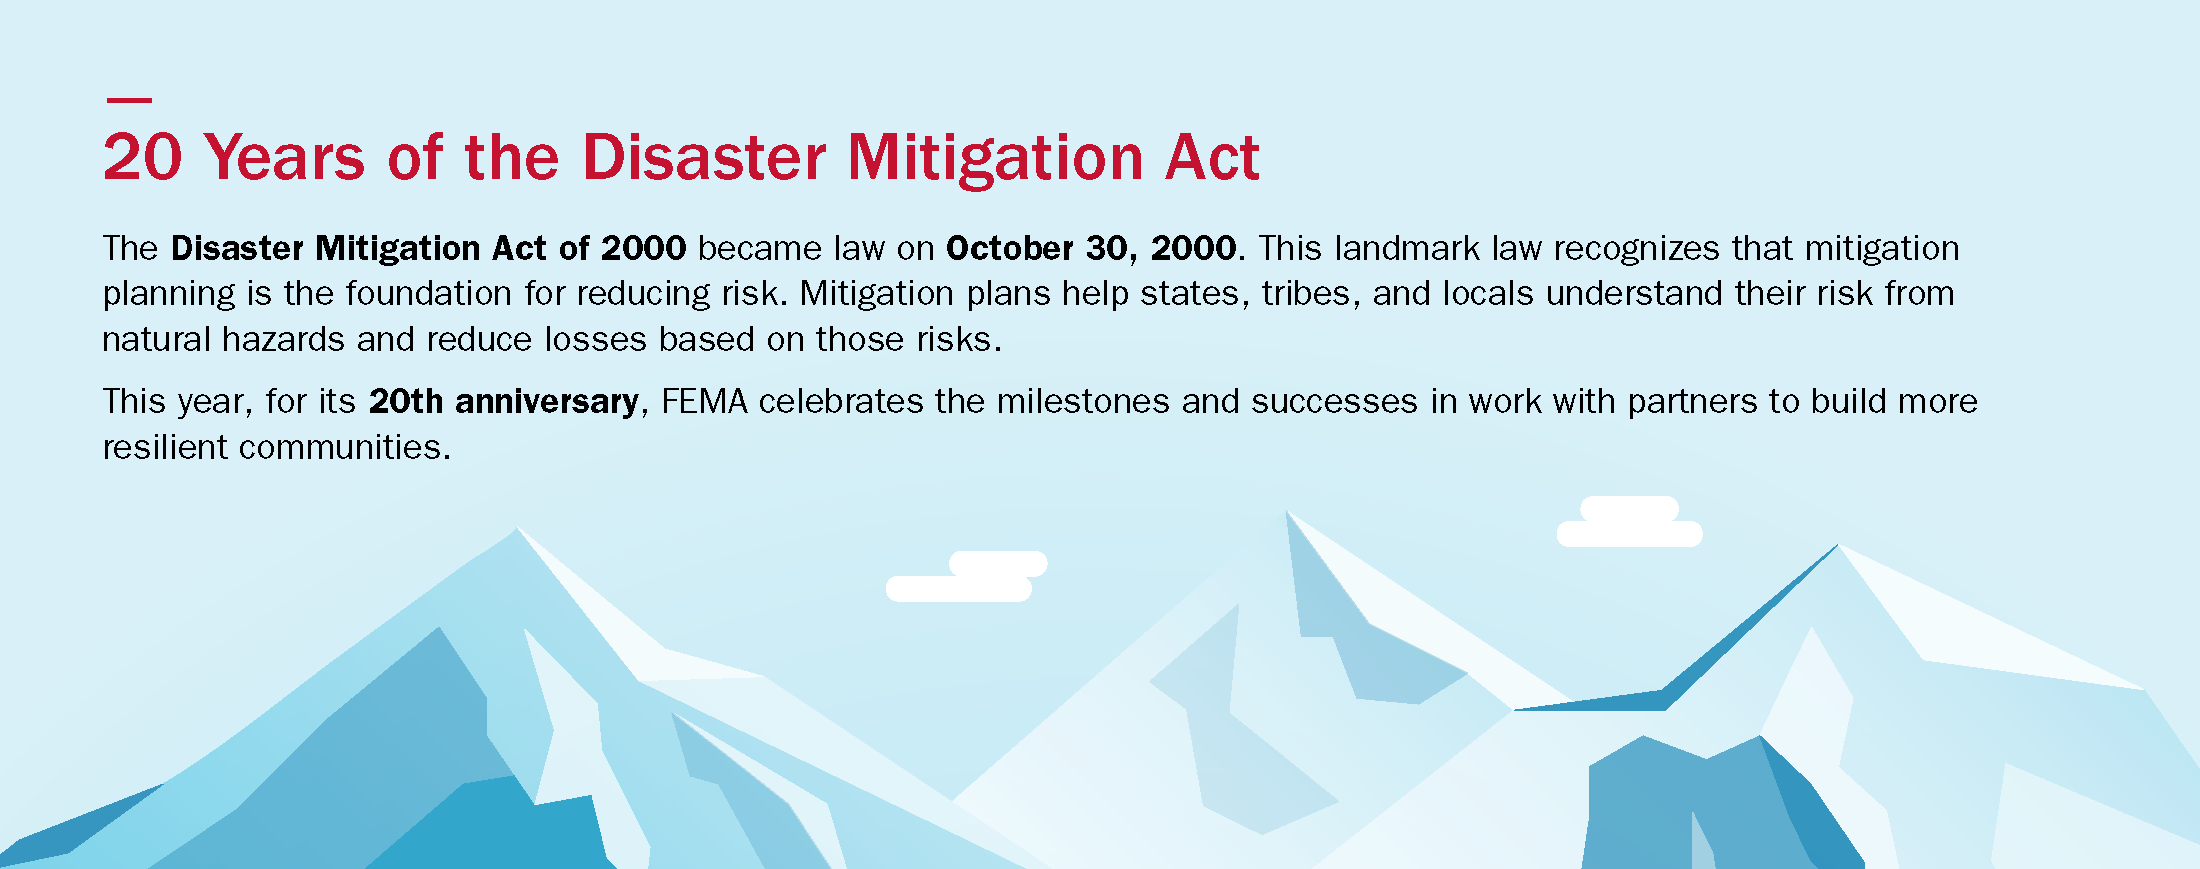 20 years of the disaster mitigation act and mountains 